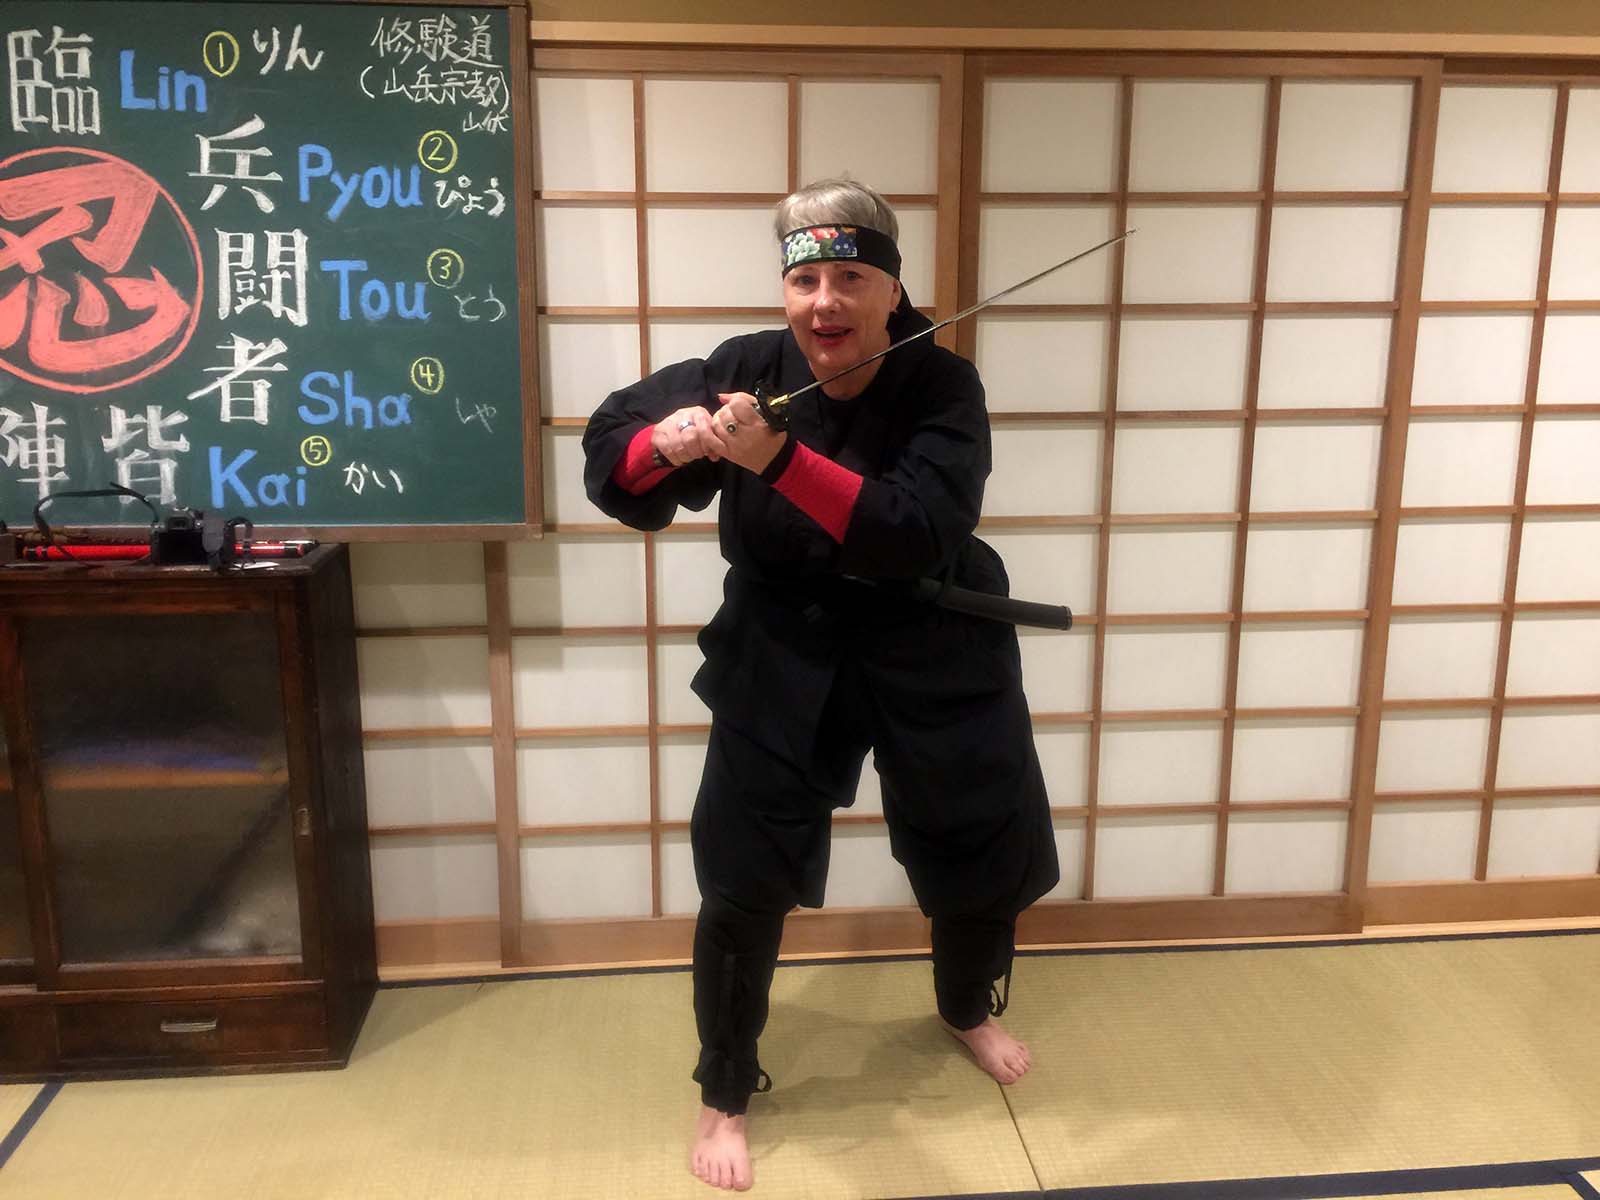 Kerry Heaney at Ninja Do, Sapporo, Japan | Winter in Sapporo